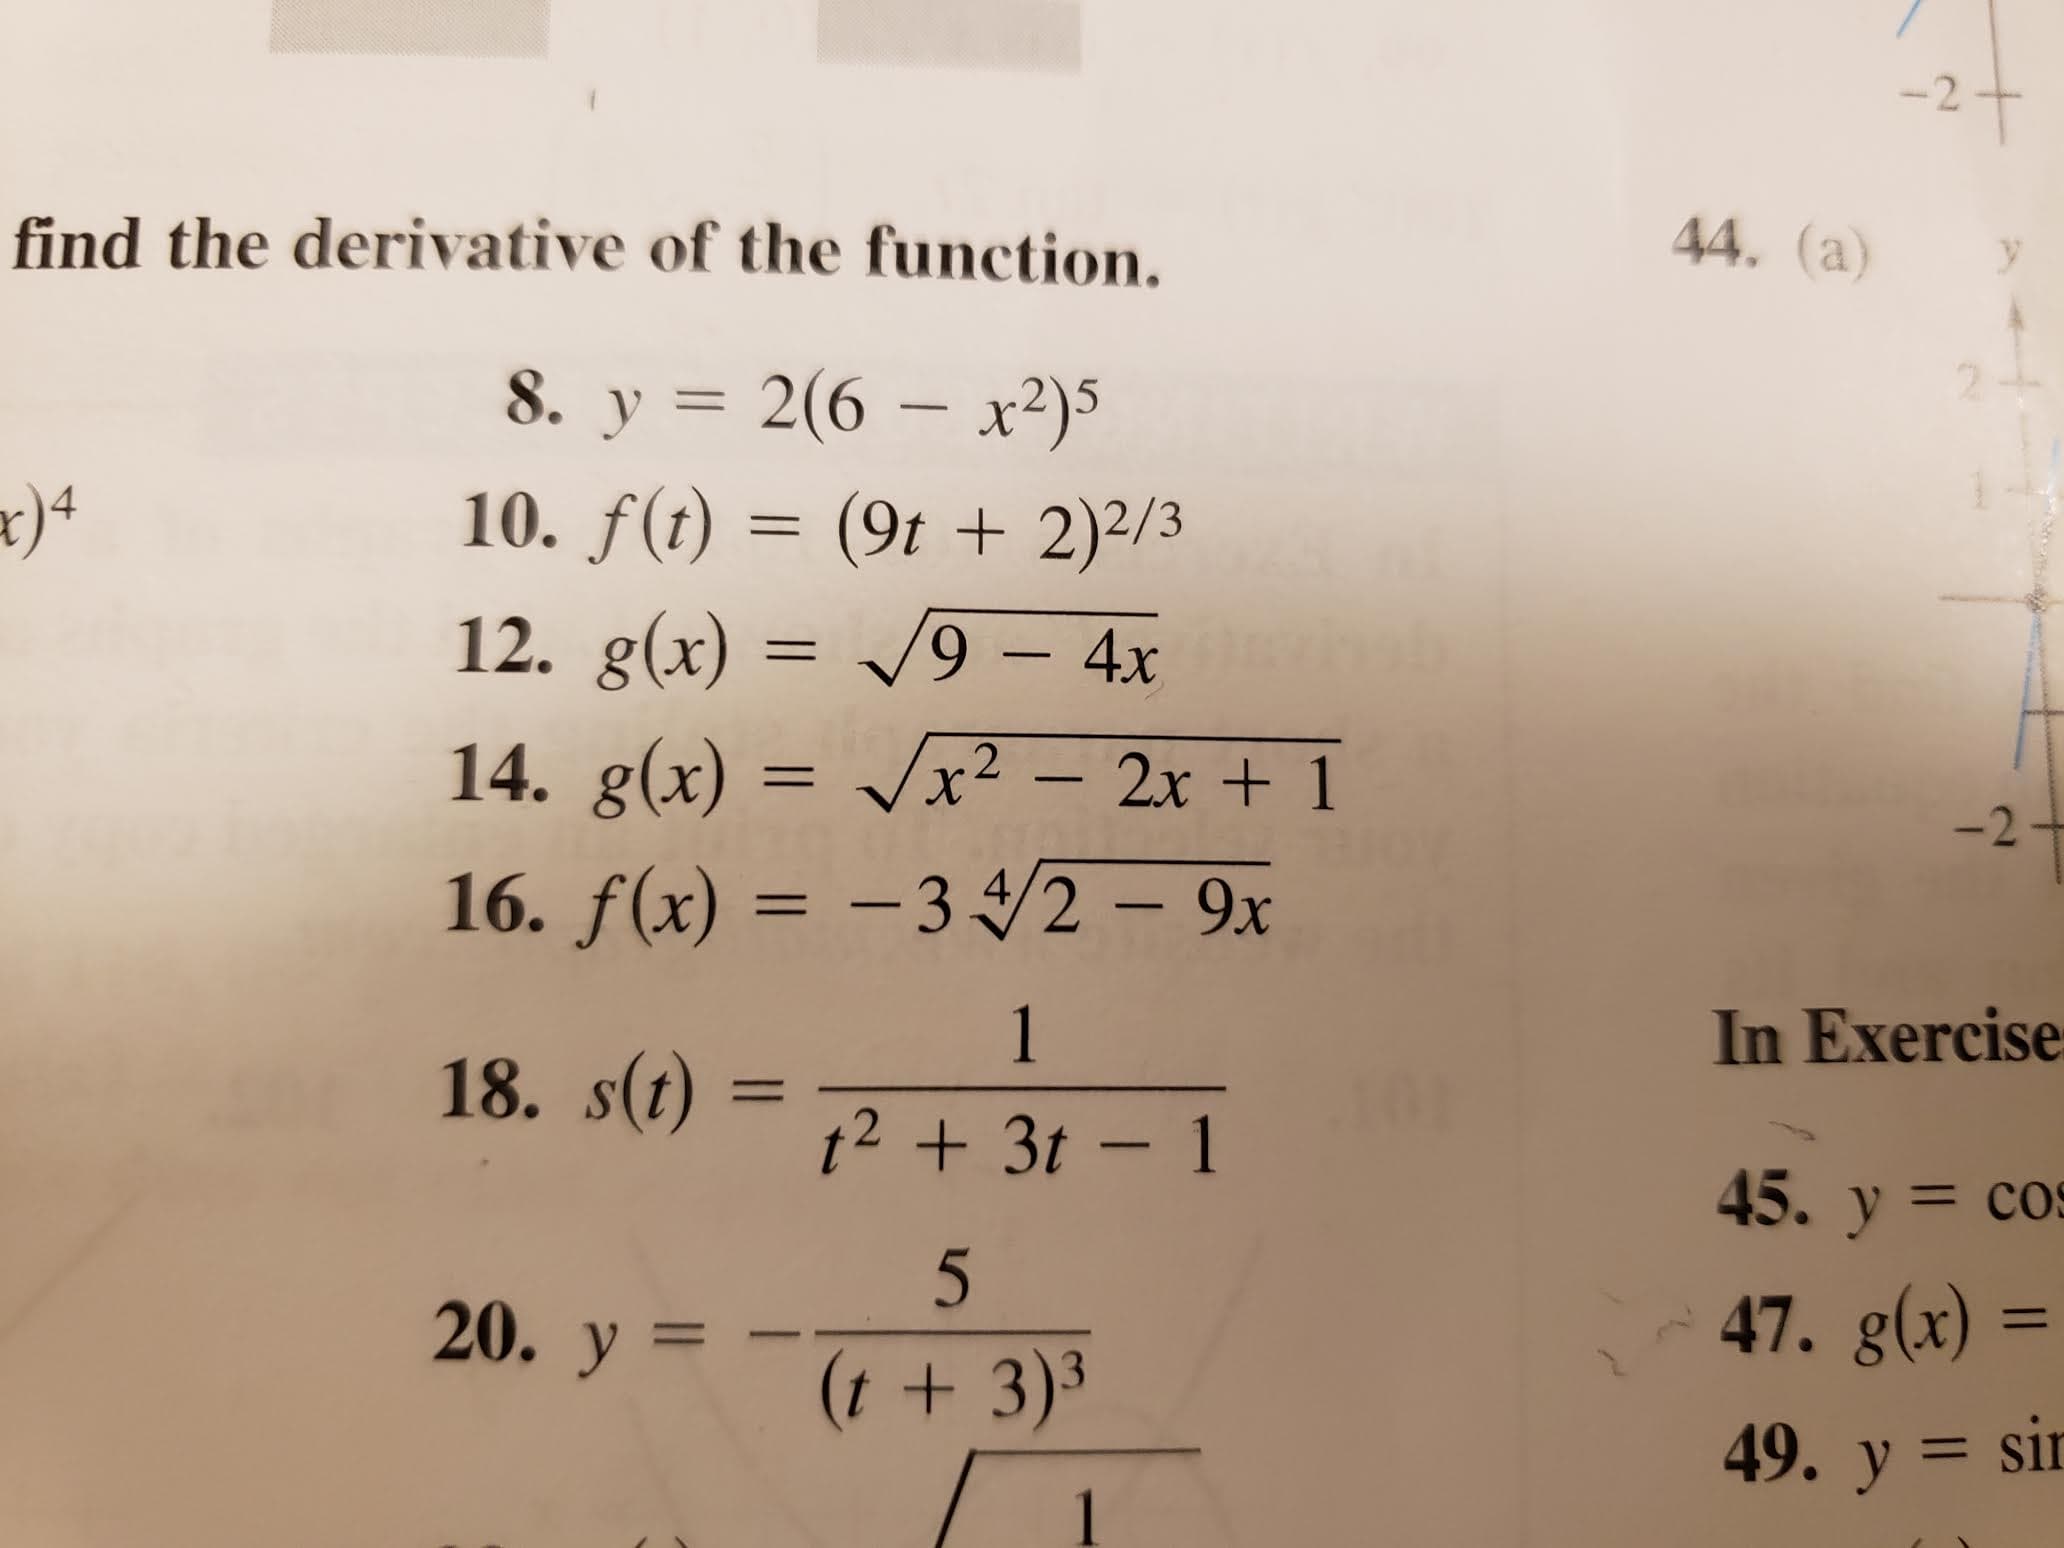 -2
find the derivative of the function.
44. (a)
2(6 x2)5
8. y
10. f(t)= (9t +2)2/3
12. g(x) = /9 - 4x
14. g(x) = x2 - 2x+1
-2+
16. f(x) =-3 /2-9x
1
In Exercise
18. s(t)
I1
t2 +3t-1
45. y cos
47. g(x)
20. у —
11
(t + 3)3
49. у %3D sir
11
